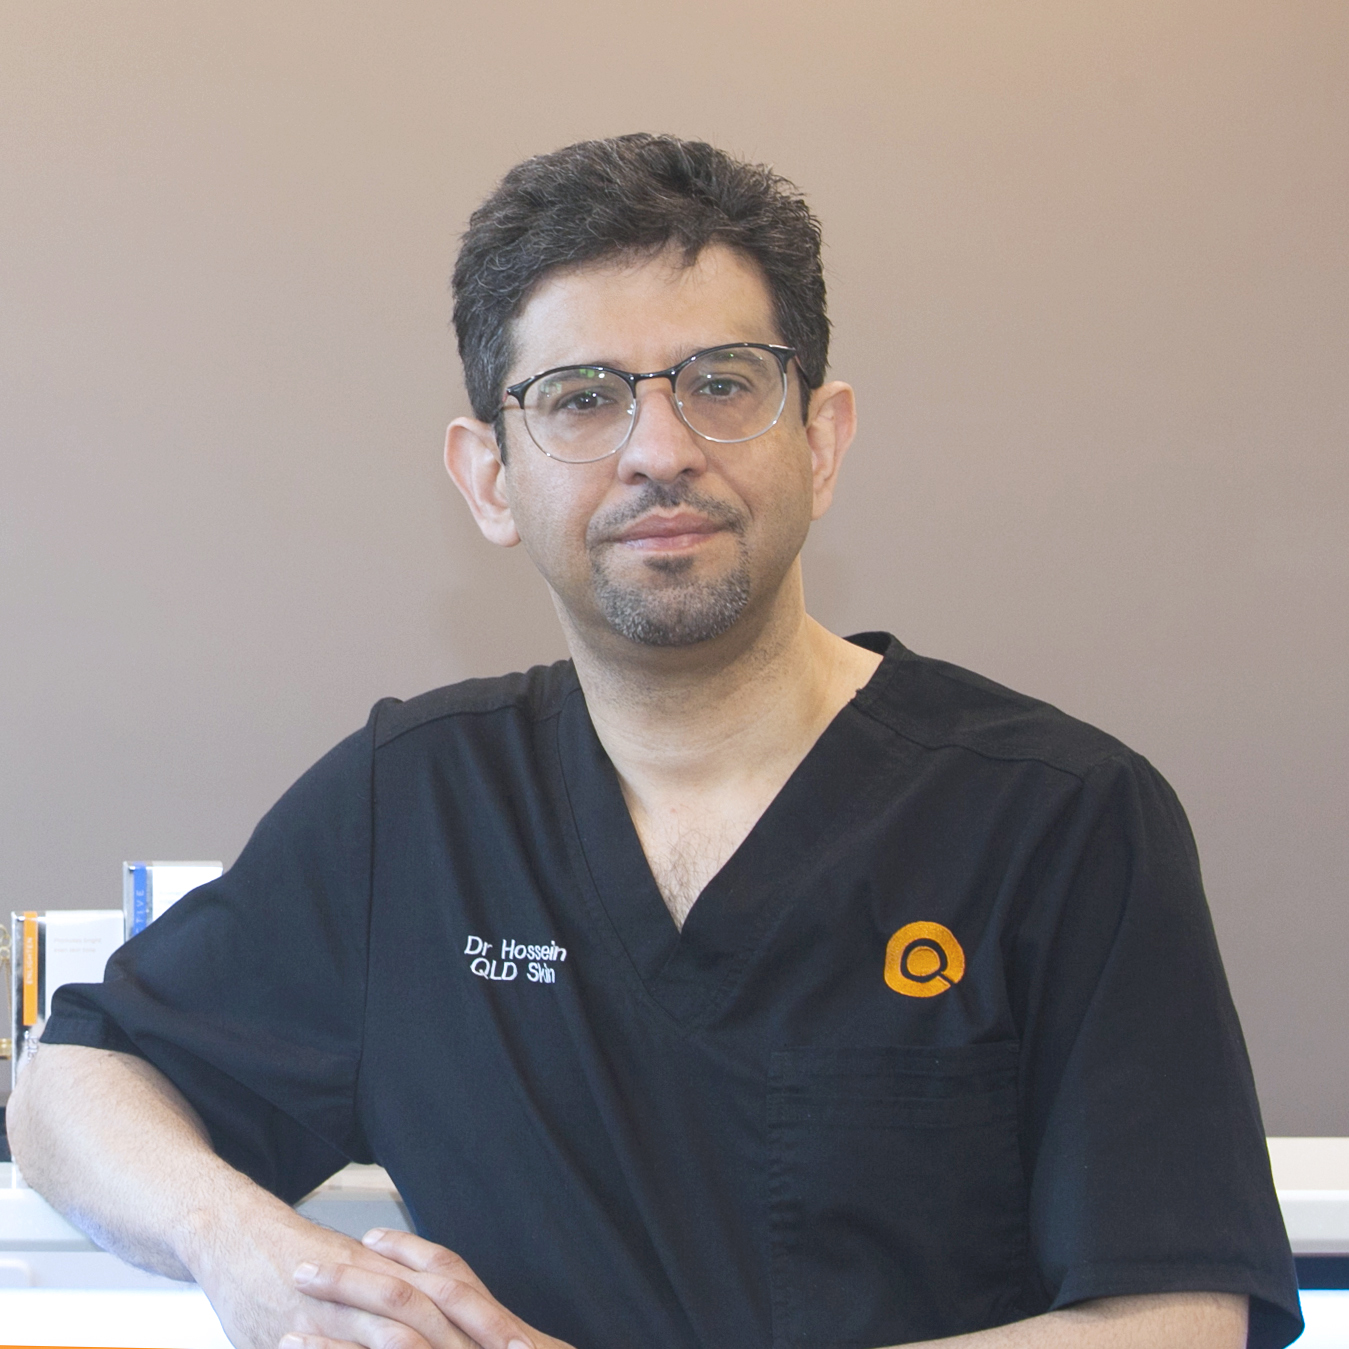 Dr Hossein Taghizadeh